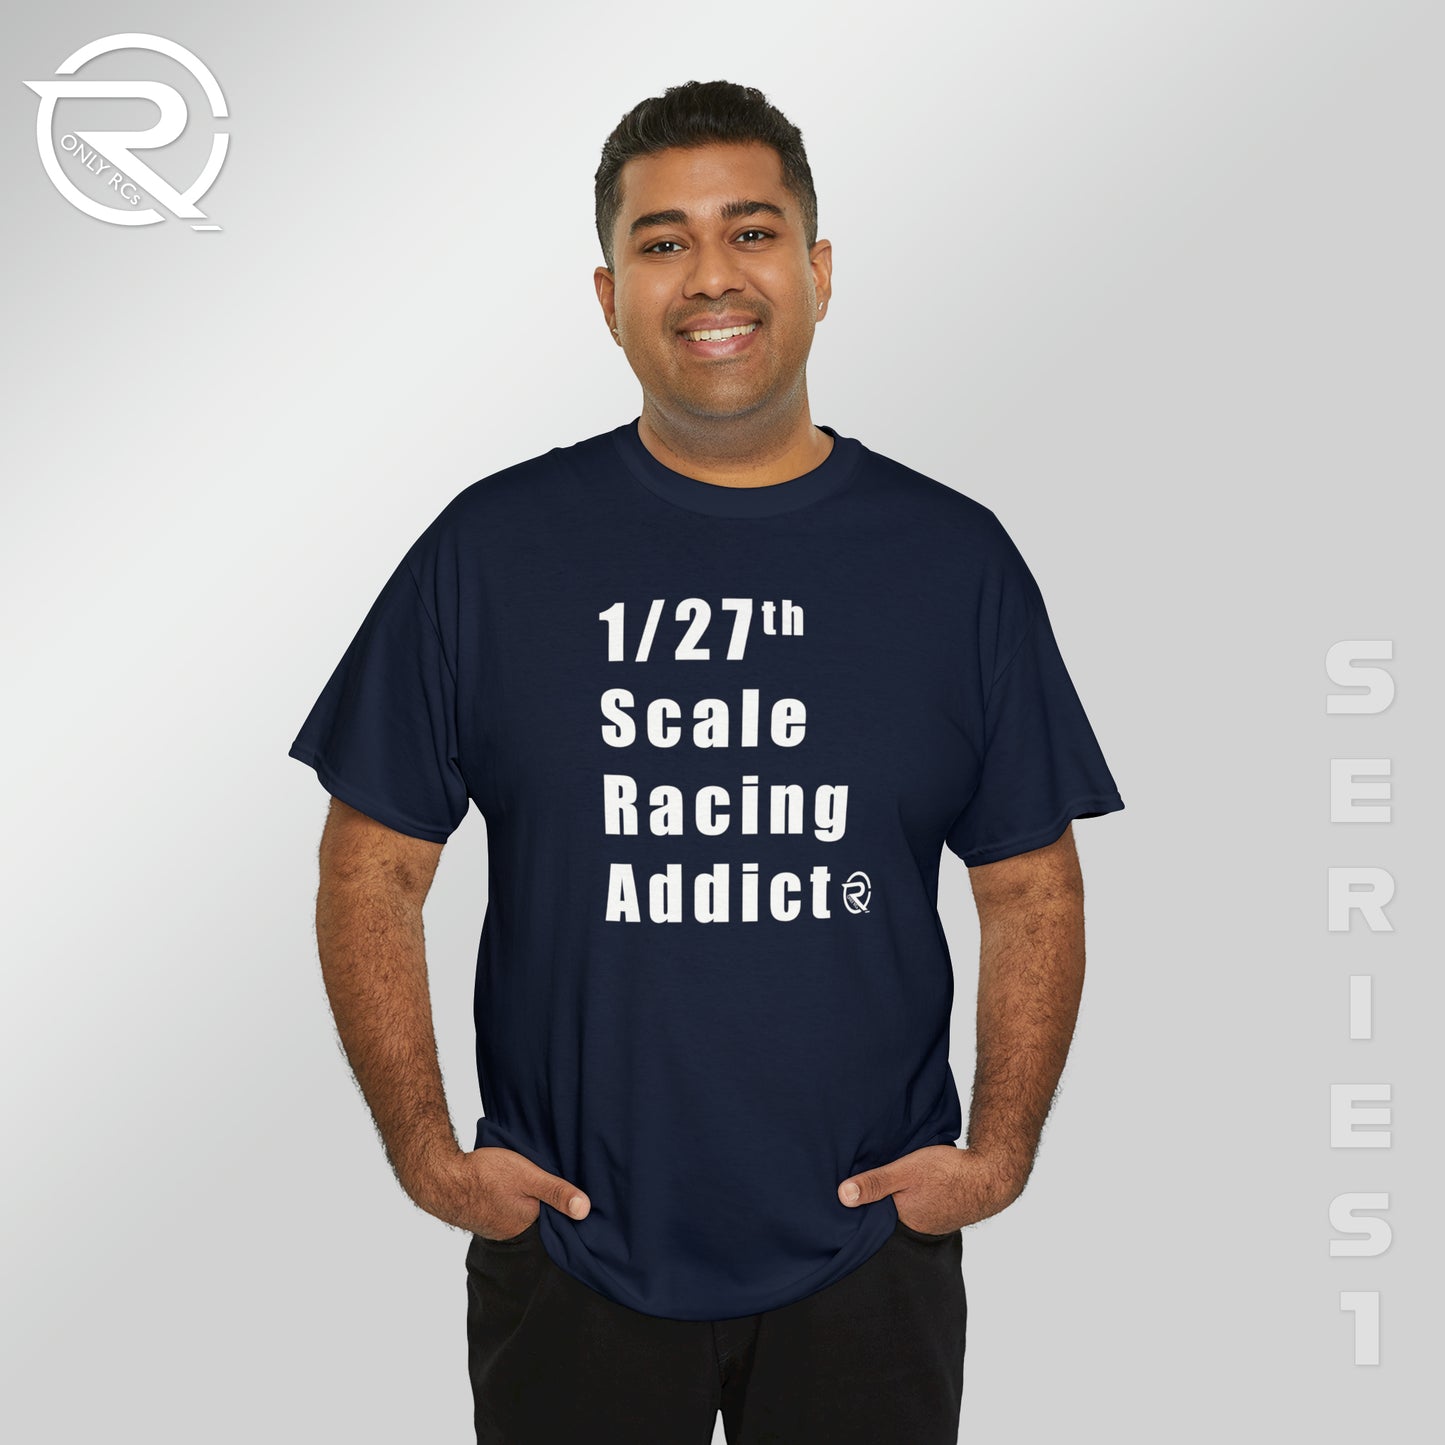 OnlyRCs - 1/27th Scale Racing Addict Heavy Cotton Tee - Series 1